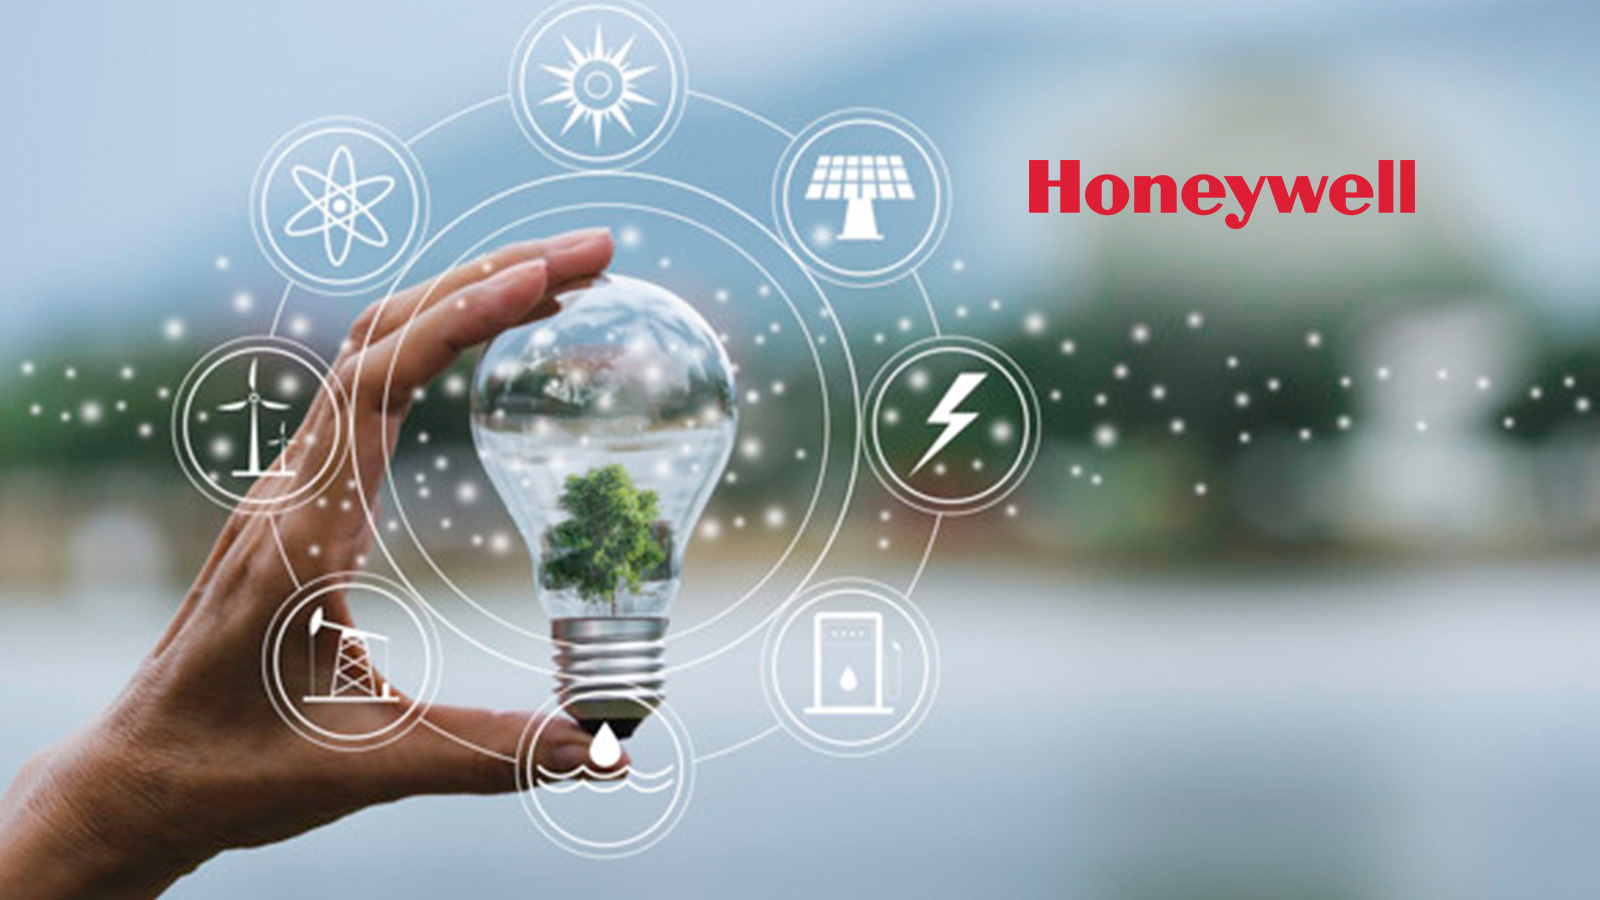 https://kavosh.group/wp-content/uploads/2021/03/Honeywell-Acquires-Rebellion-Photonics_-A-Leader-In-Intelligent_-Automated_-Visual-Gas-Monitoring-Solutions.jpg